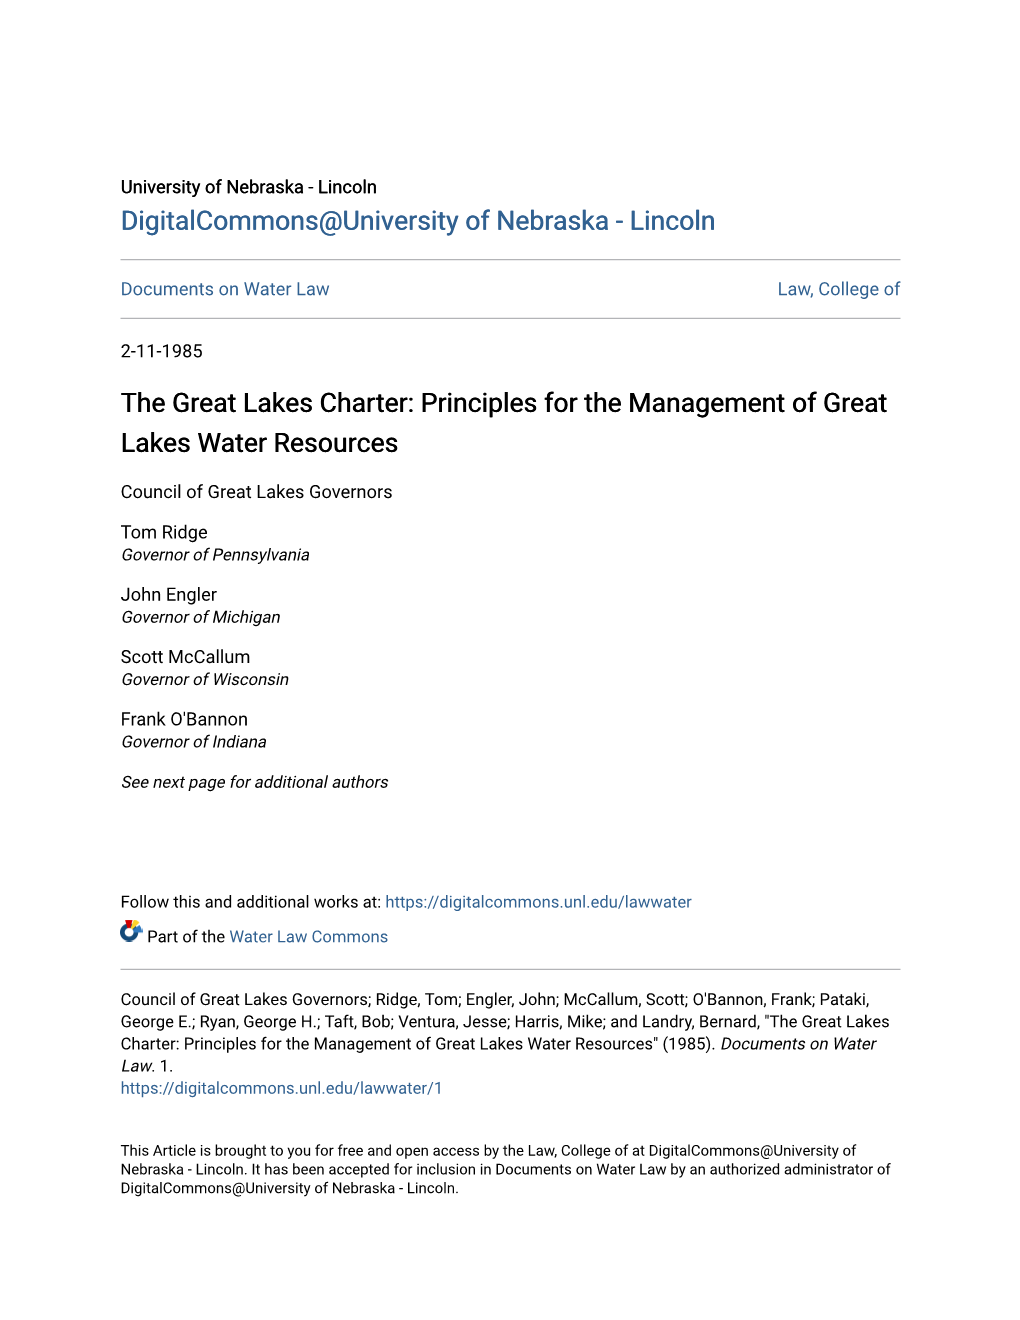 The Great Lakes Charter: Principles for the Management of Great Lakes Water Resources